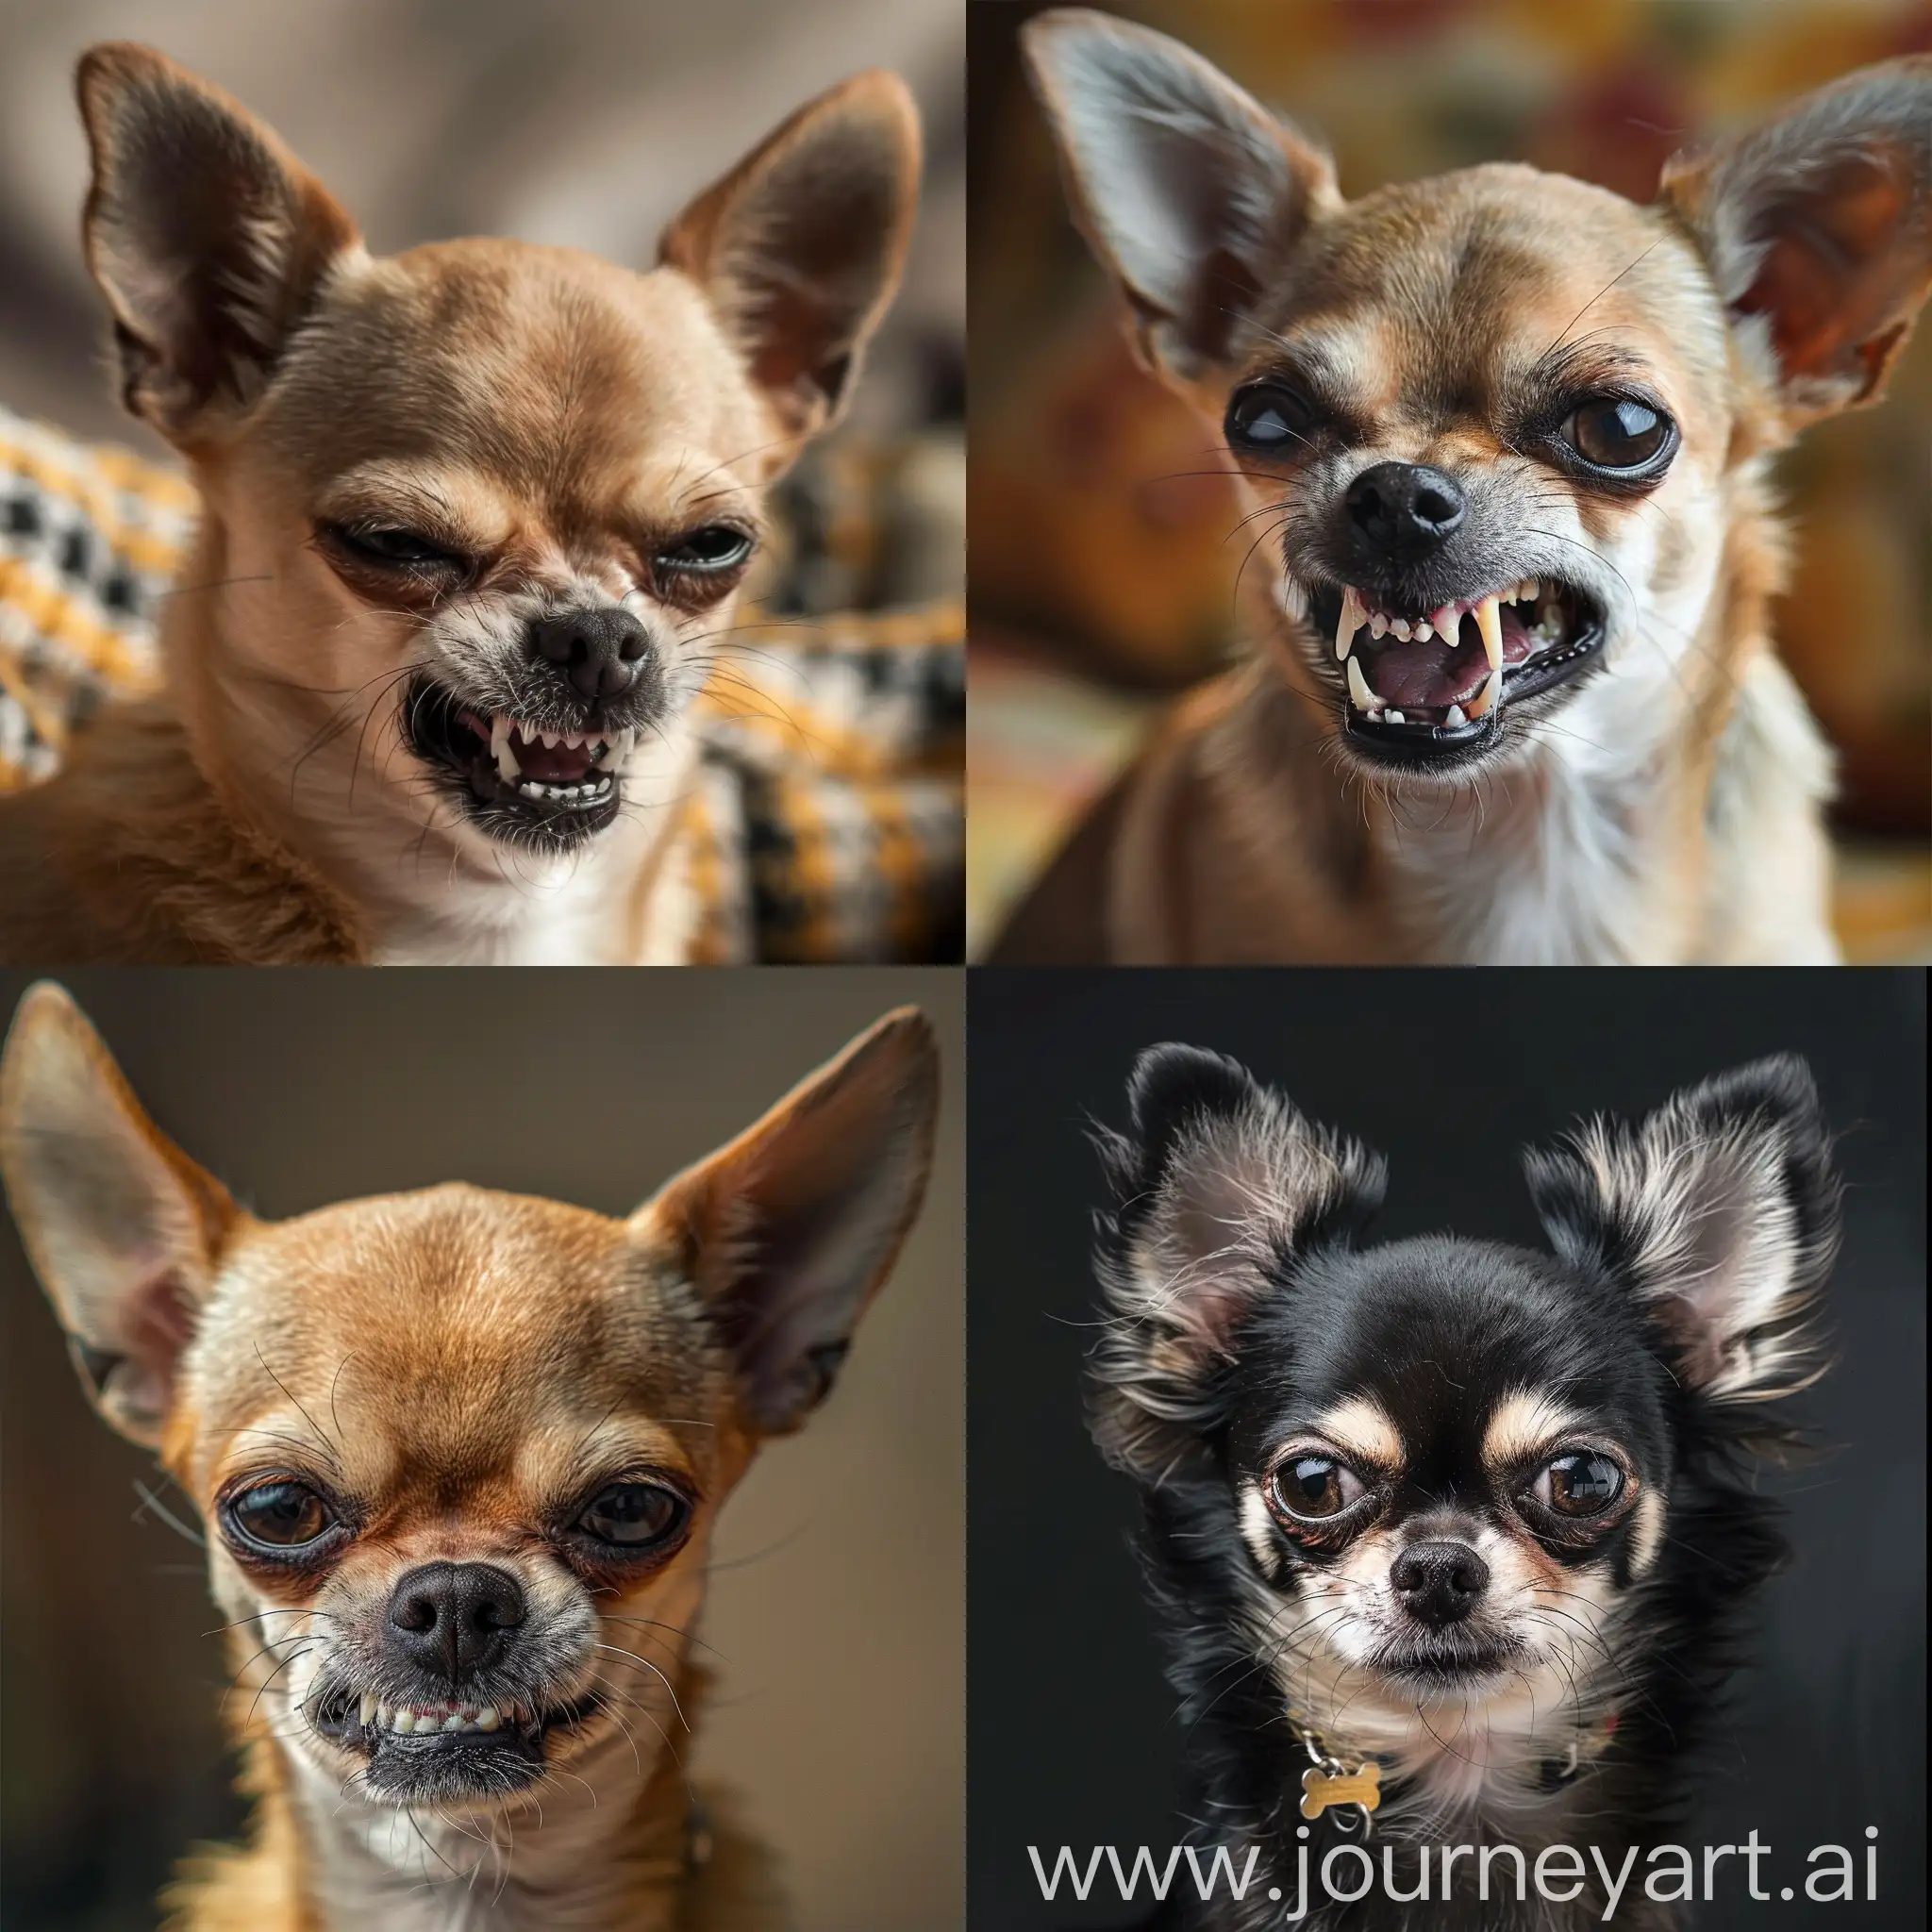 Fierce-Angry-Chihuahua-with-Intense-Expression